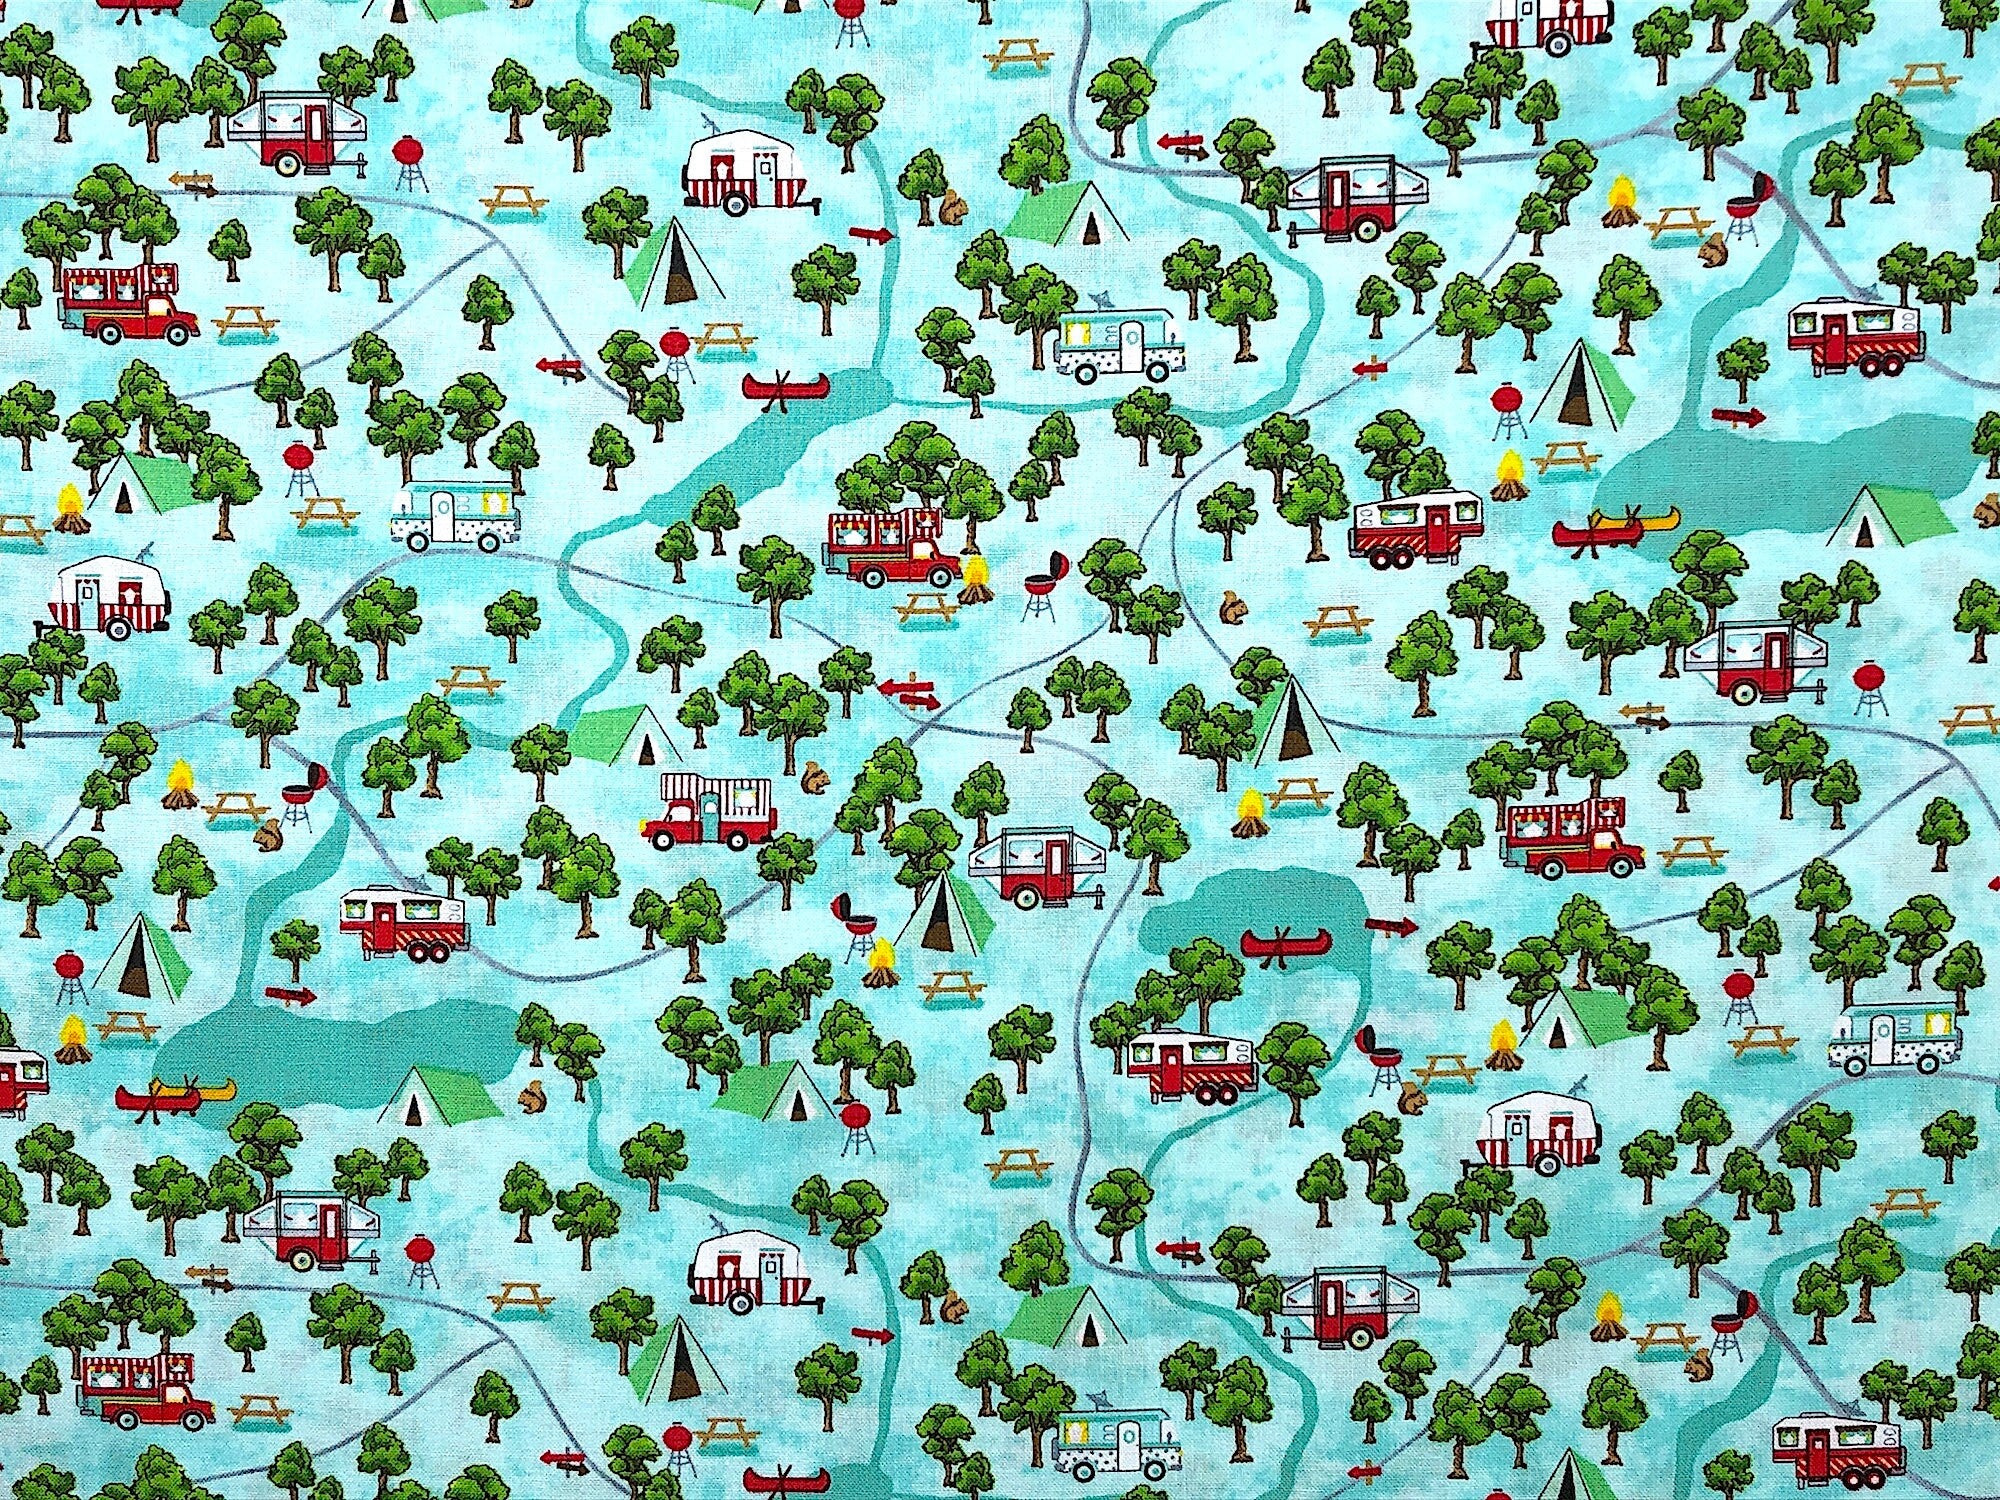 This fabric is called campsite map and is covered with travel trailers, campers on trucks, 5th wheels pop up tents, 5th wheels, trees, grills, picnic tables and more. This fabric is part of the Roaming Holiday Collection by Pam Bocko.